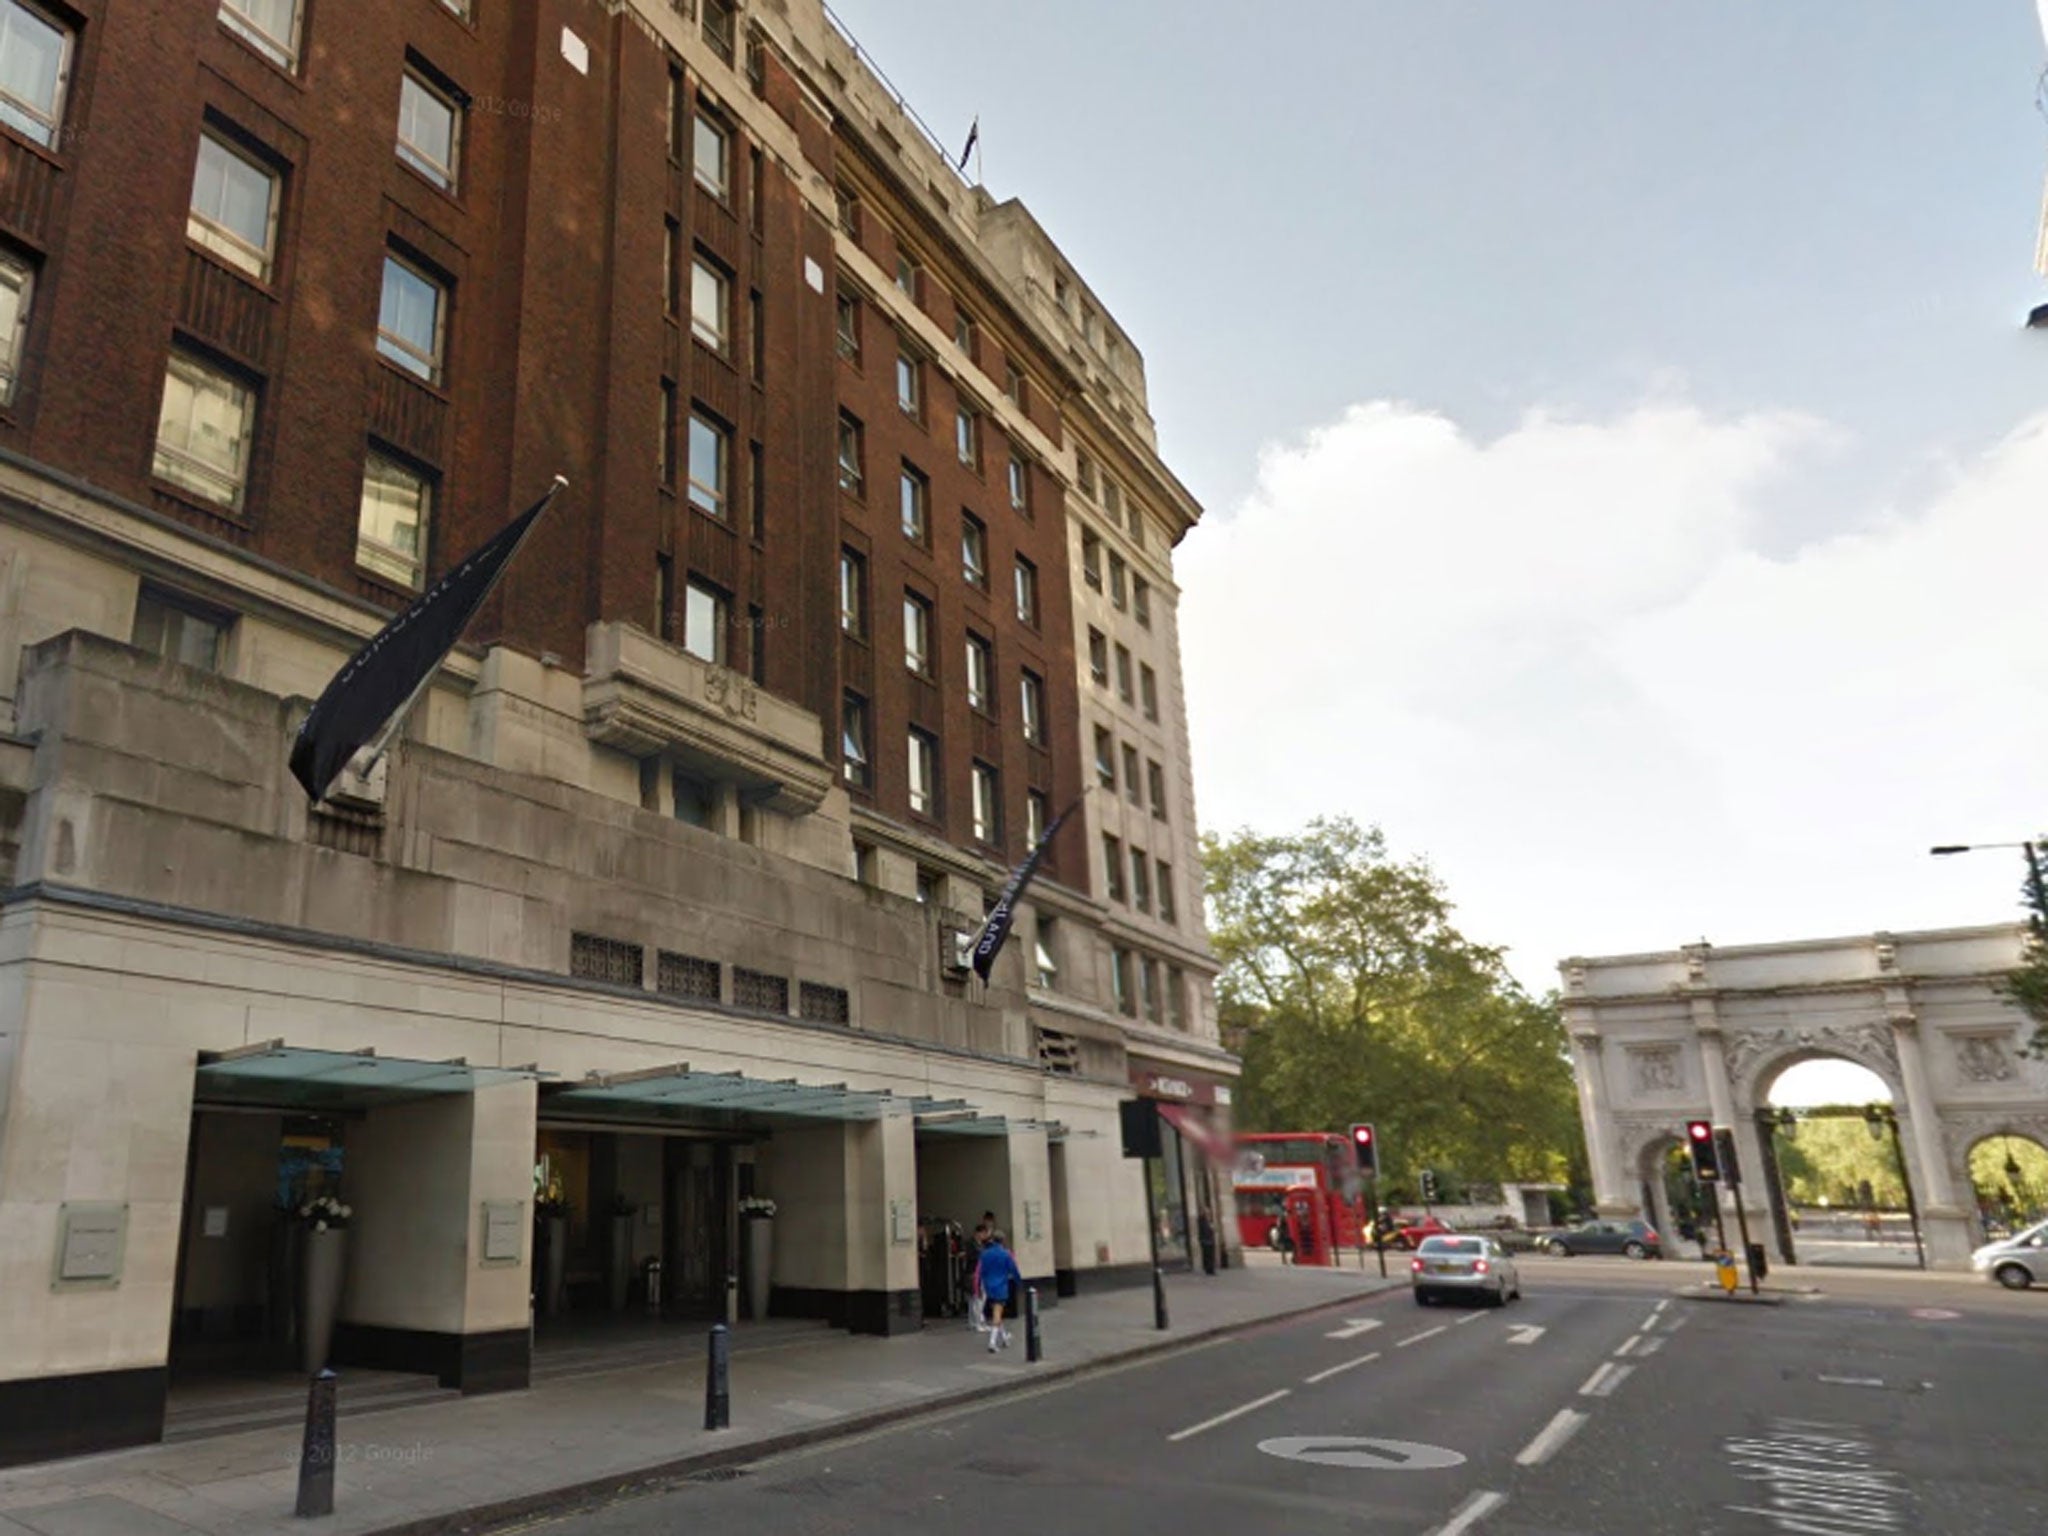 The victims, all from the United Arab Emirates and aged in their 30s, were staying at the Cumberland Hotel, which is near Marble Arch in London's West End, when they were attacked at around 1.50am yesterday.